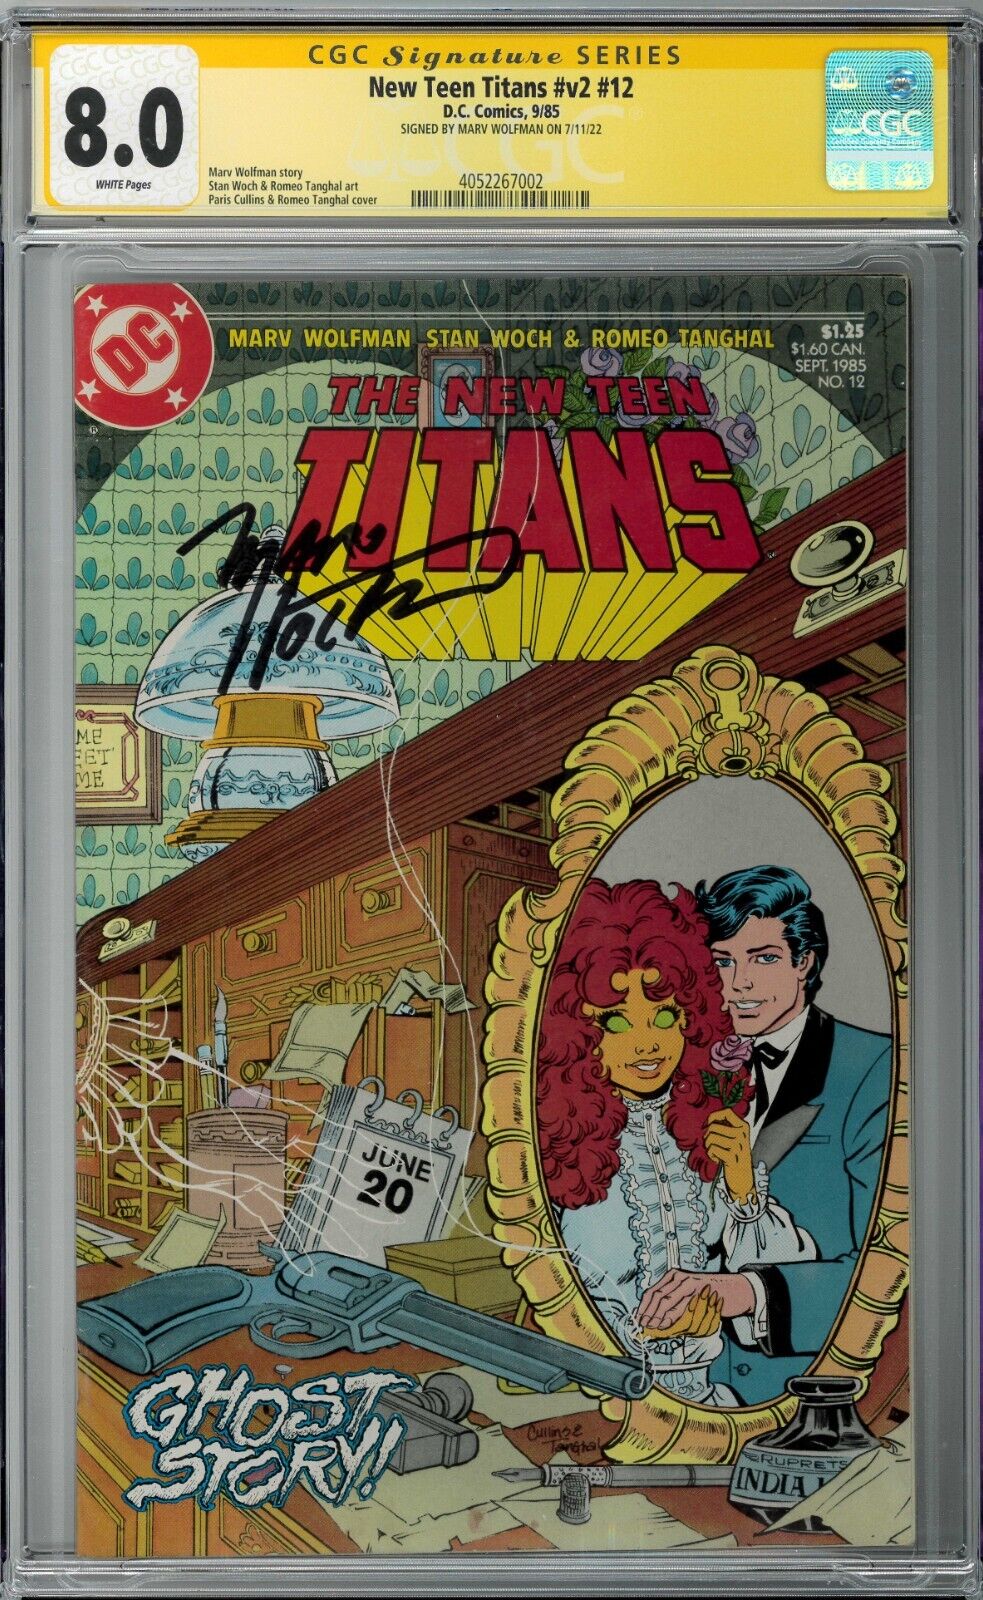 New Teen Titans v2 #12 CGC SS 8.0 (Sep 1985, DC) Signed by Marv Wolfman